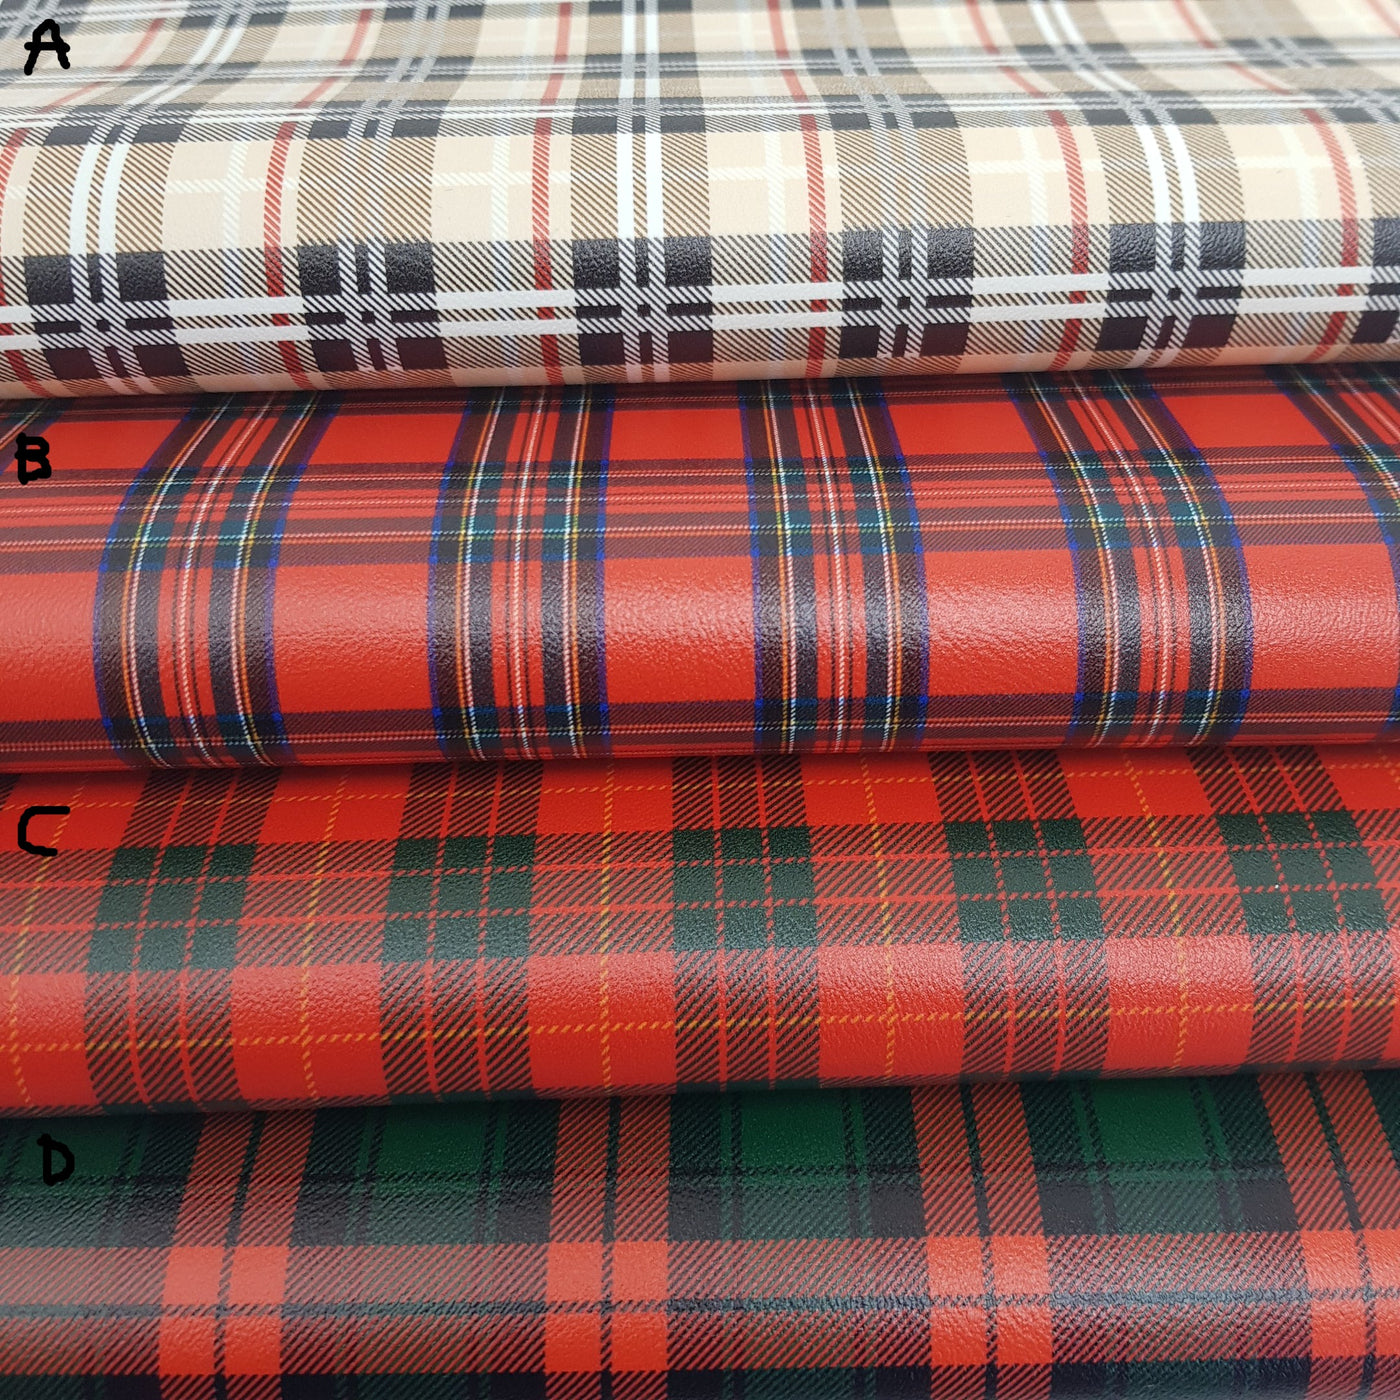 tartan red - Pu Leather vinyl - canvas - choose Fabric material Sheets